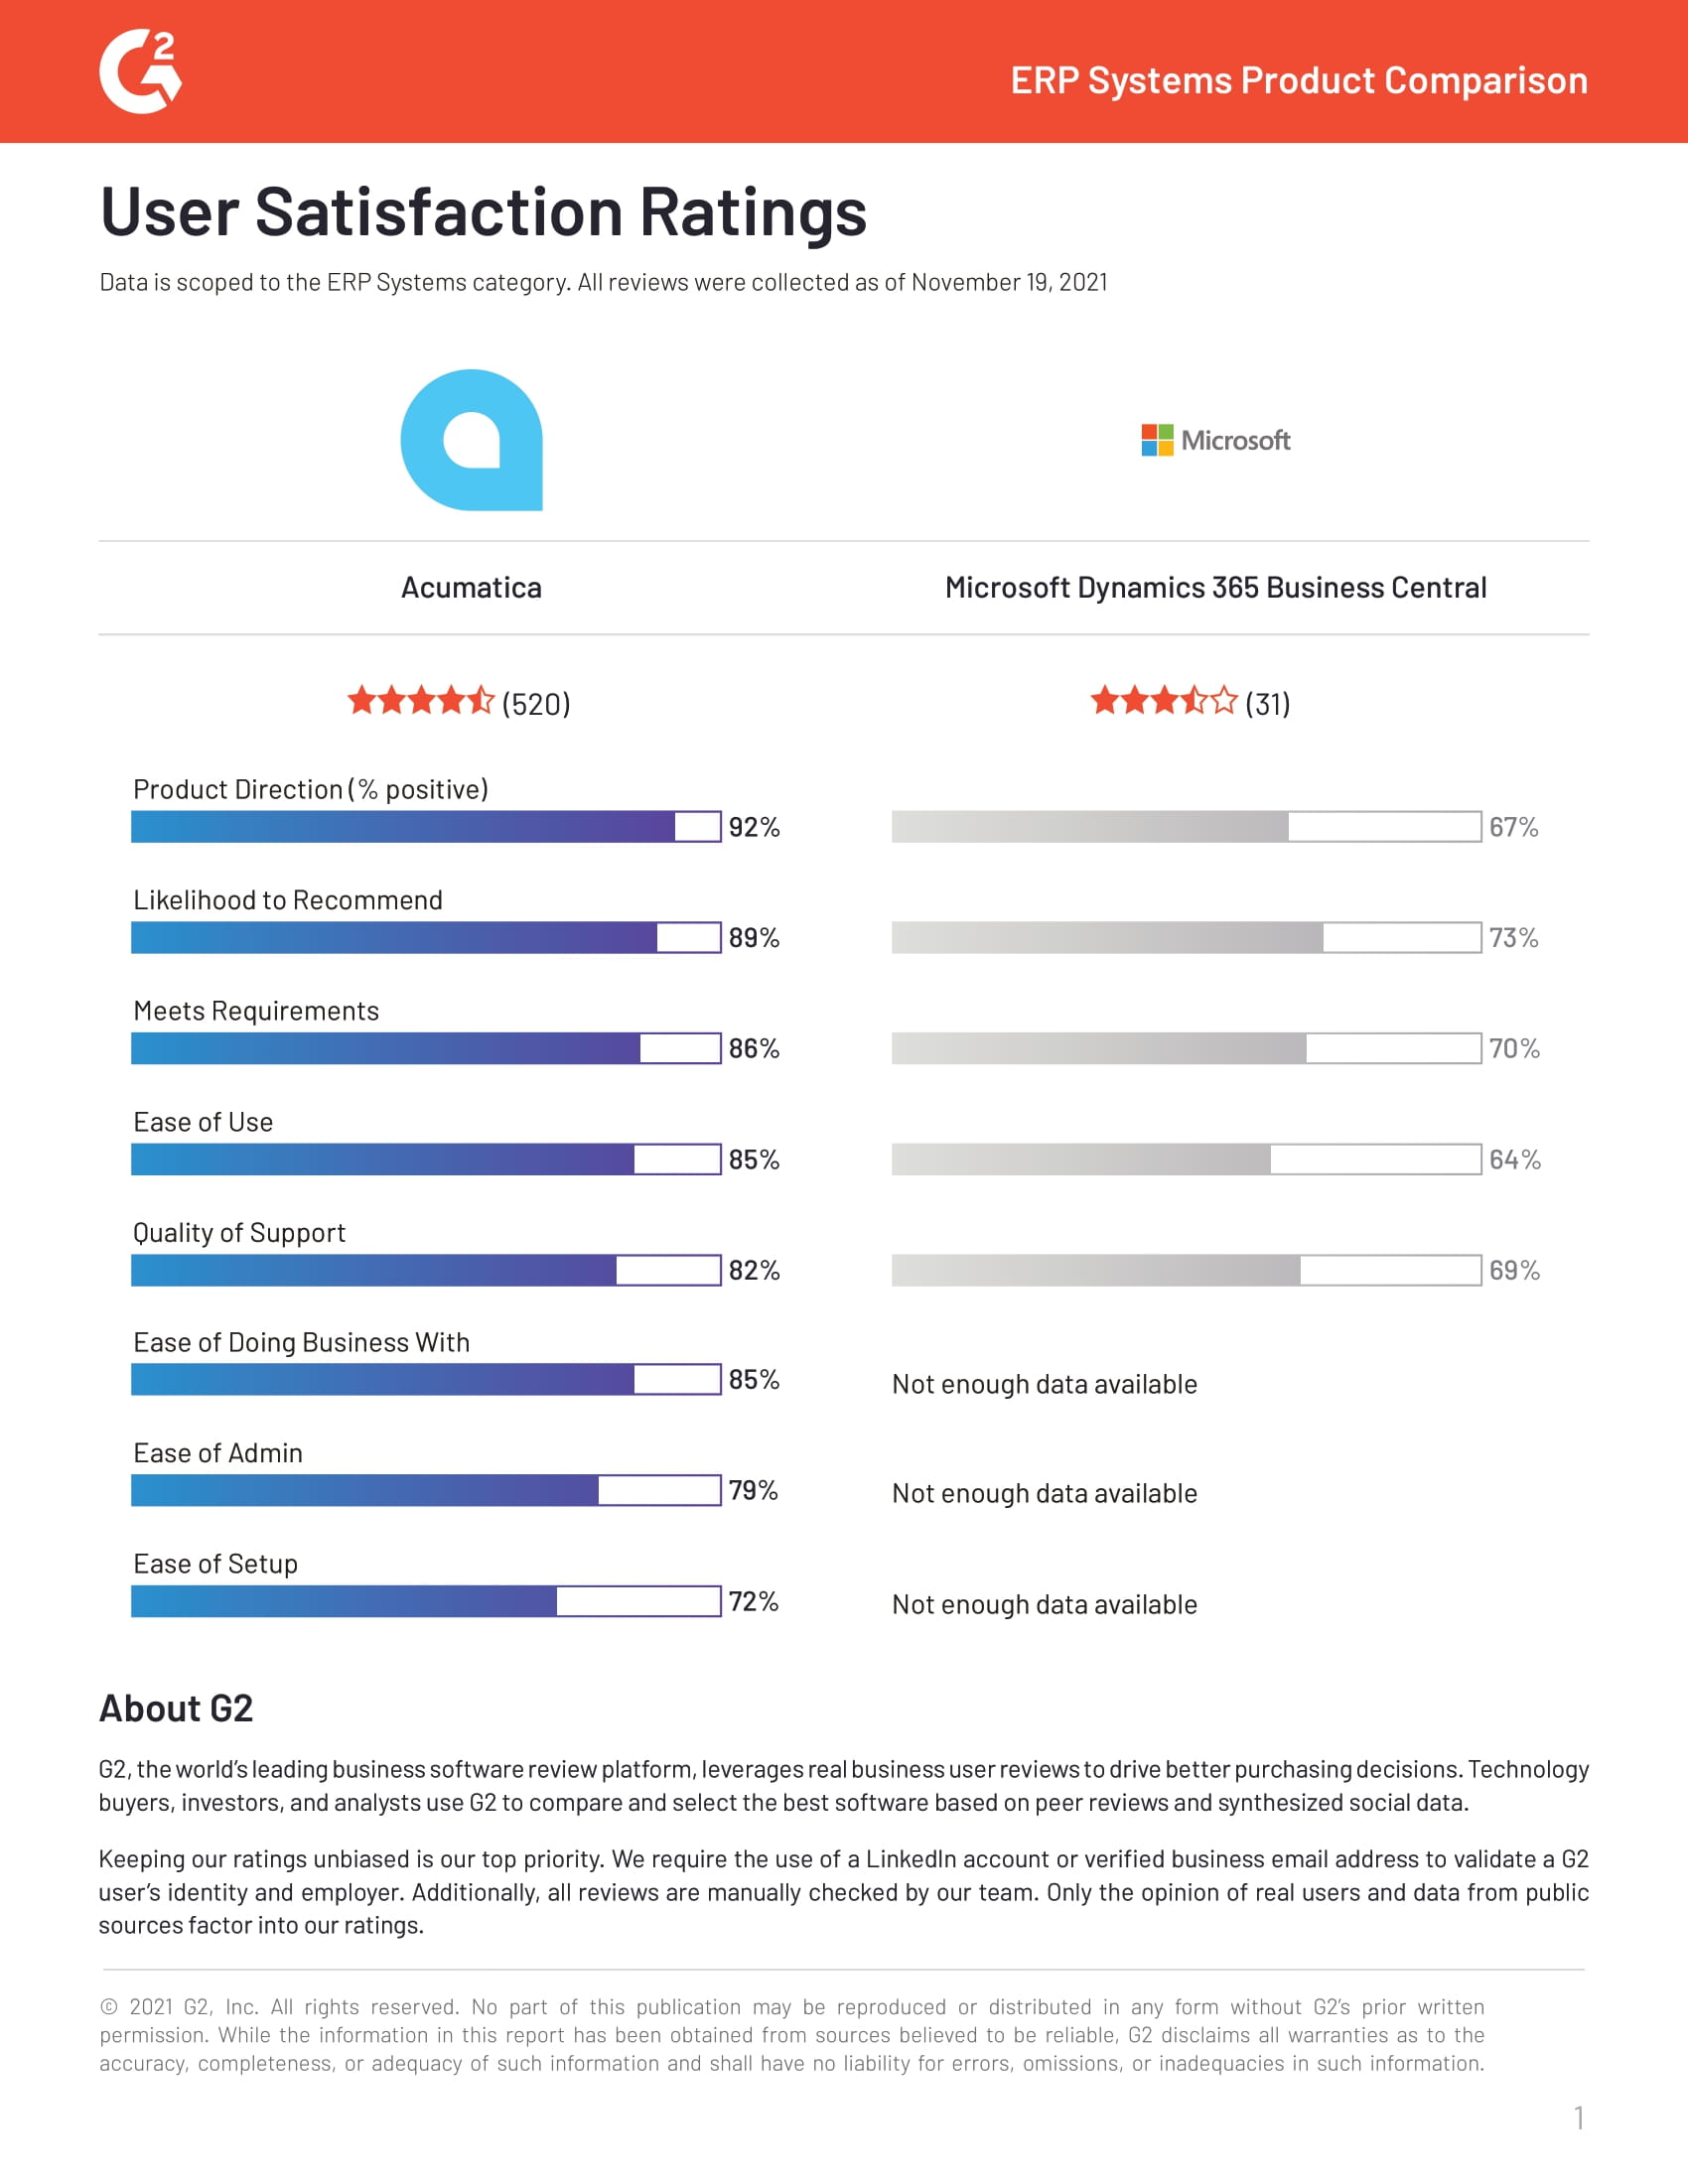 ERP Competitors Report: How Acumatica Stacks Up Against Microsoft Dynamics, page 0